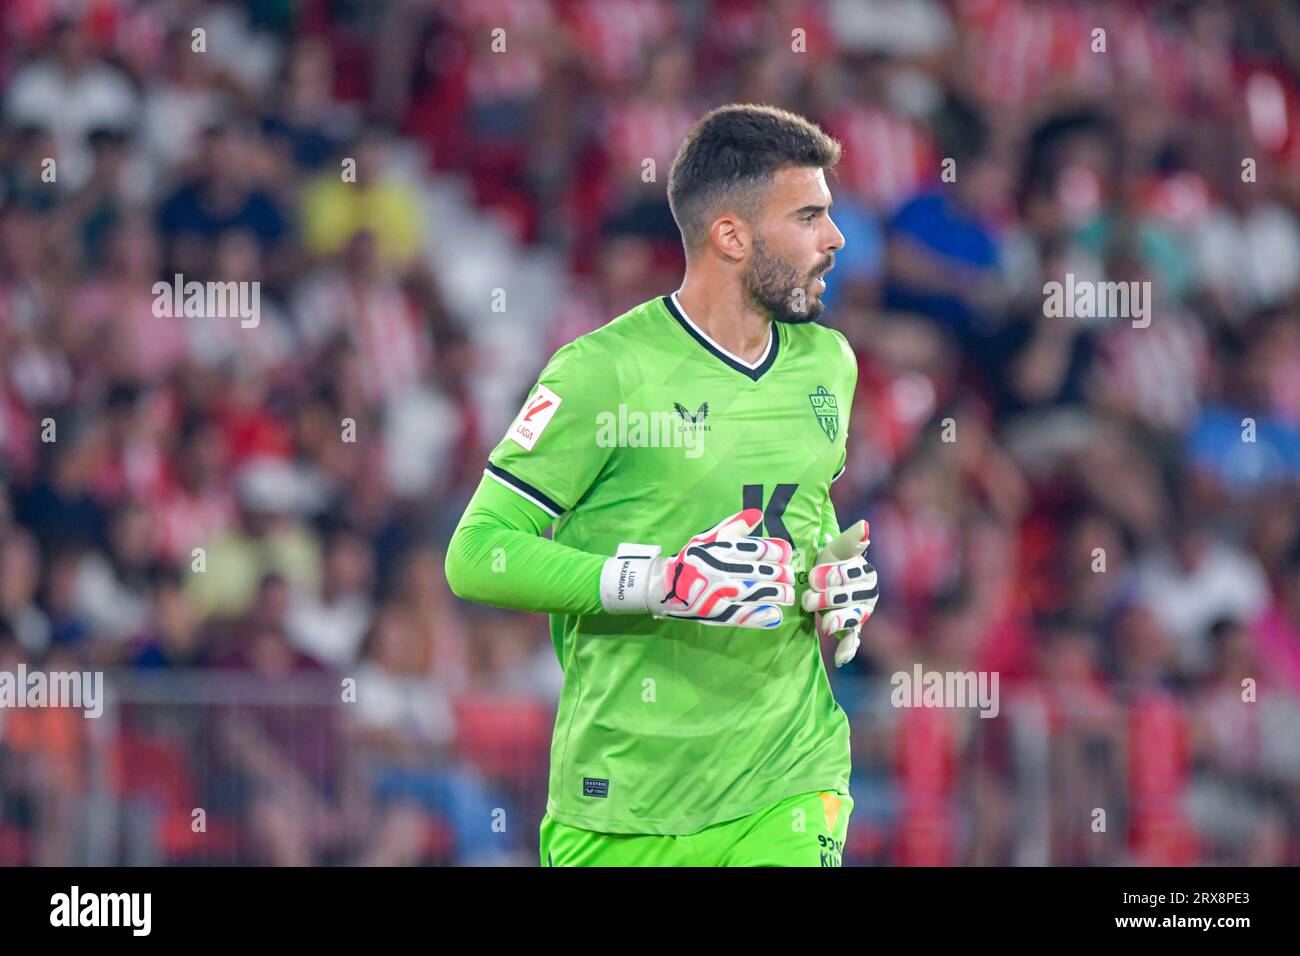 ALMERIA, SPAIN - SEPTEMBER 23: Luis Maximiano of UD Almeria focus during the match between UD Almeria and Valencia CF of La Liga EA Sports on September 23, 2023 at Power Horse Stadium in Almeria, Spain. (Photo by Samuel Carreño) Credit: Px Images/Alamy Live News Stock Photo